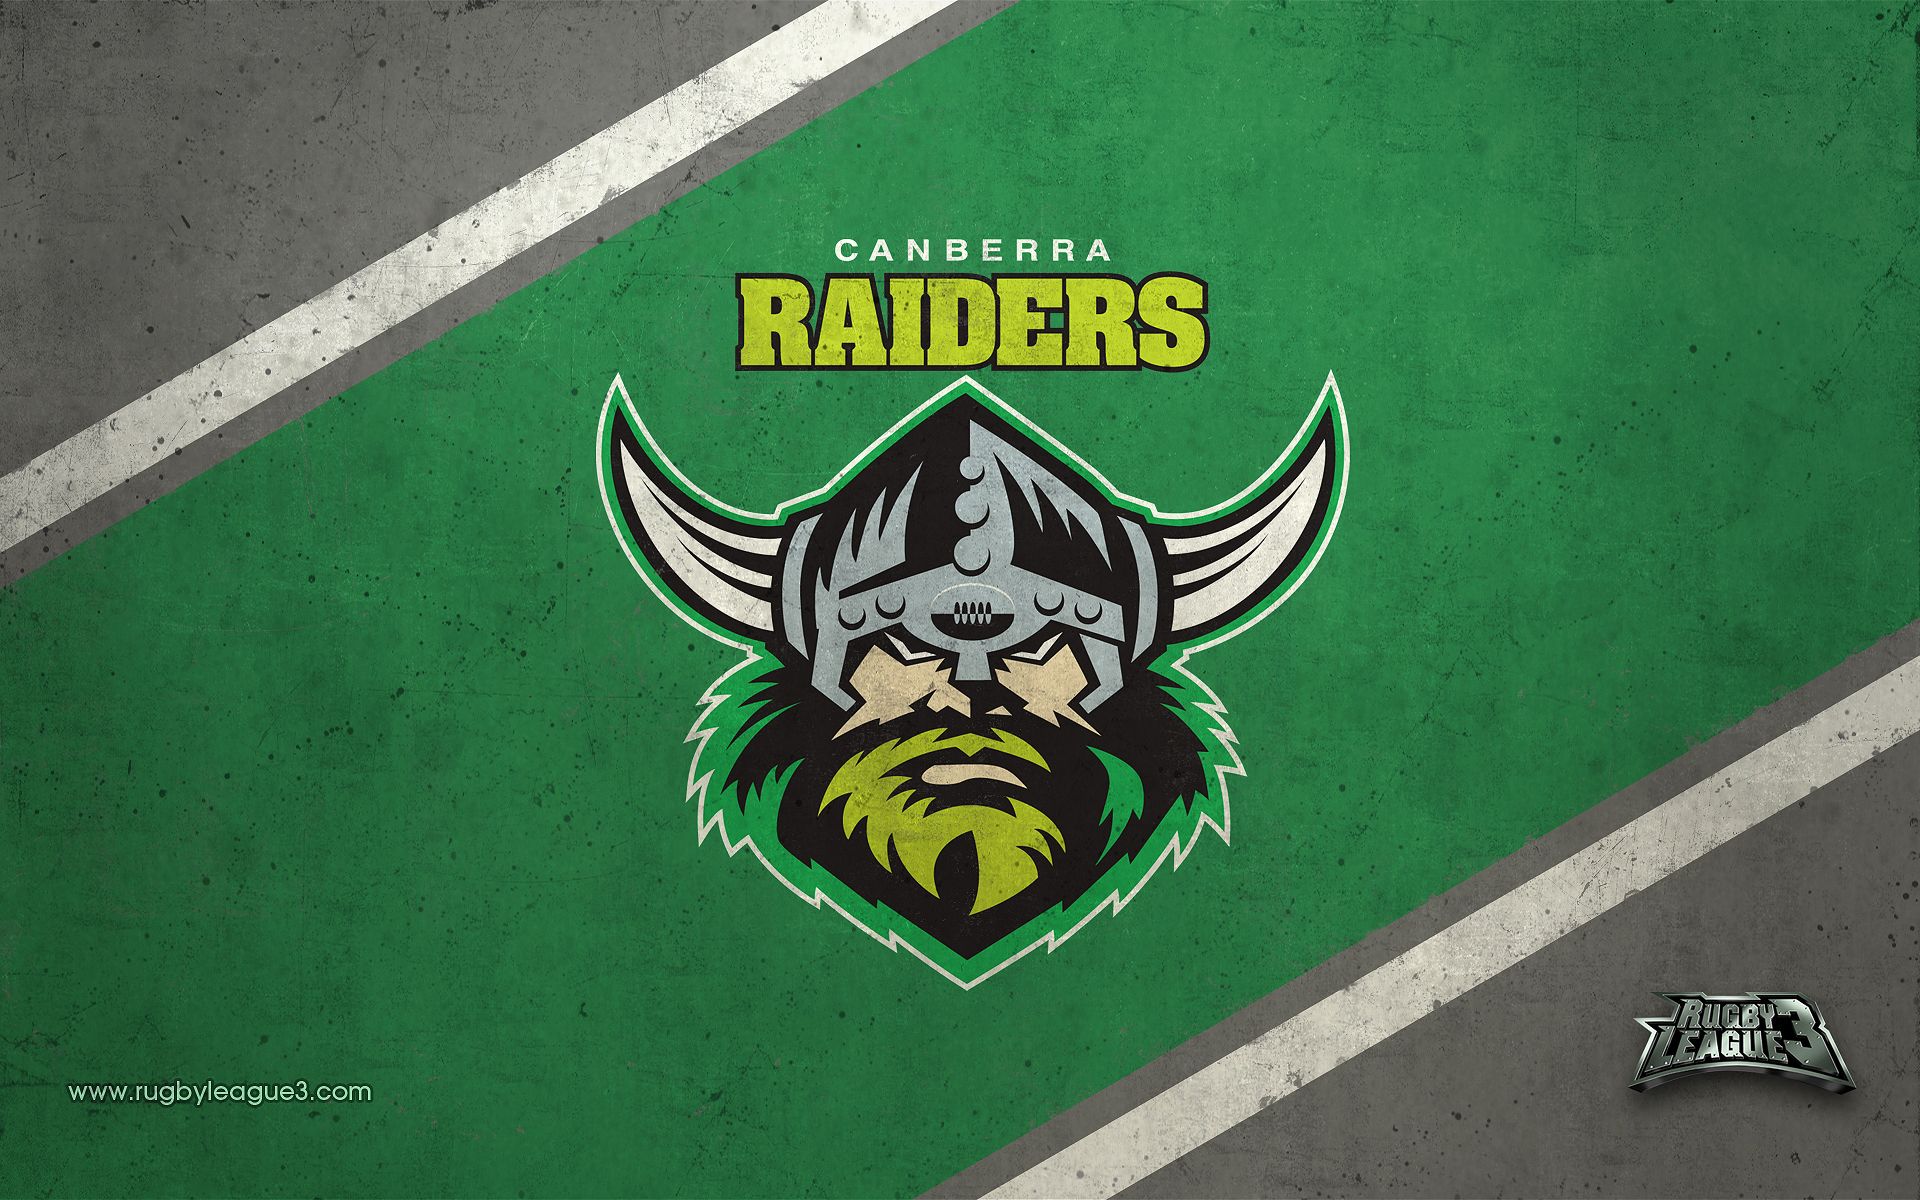 Canberra Raiders Wallpapers - Wallpaper Cave